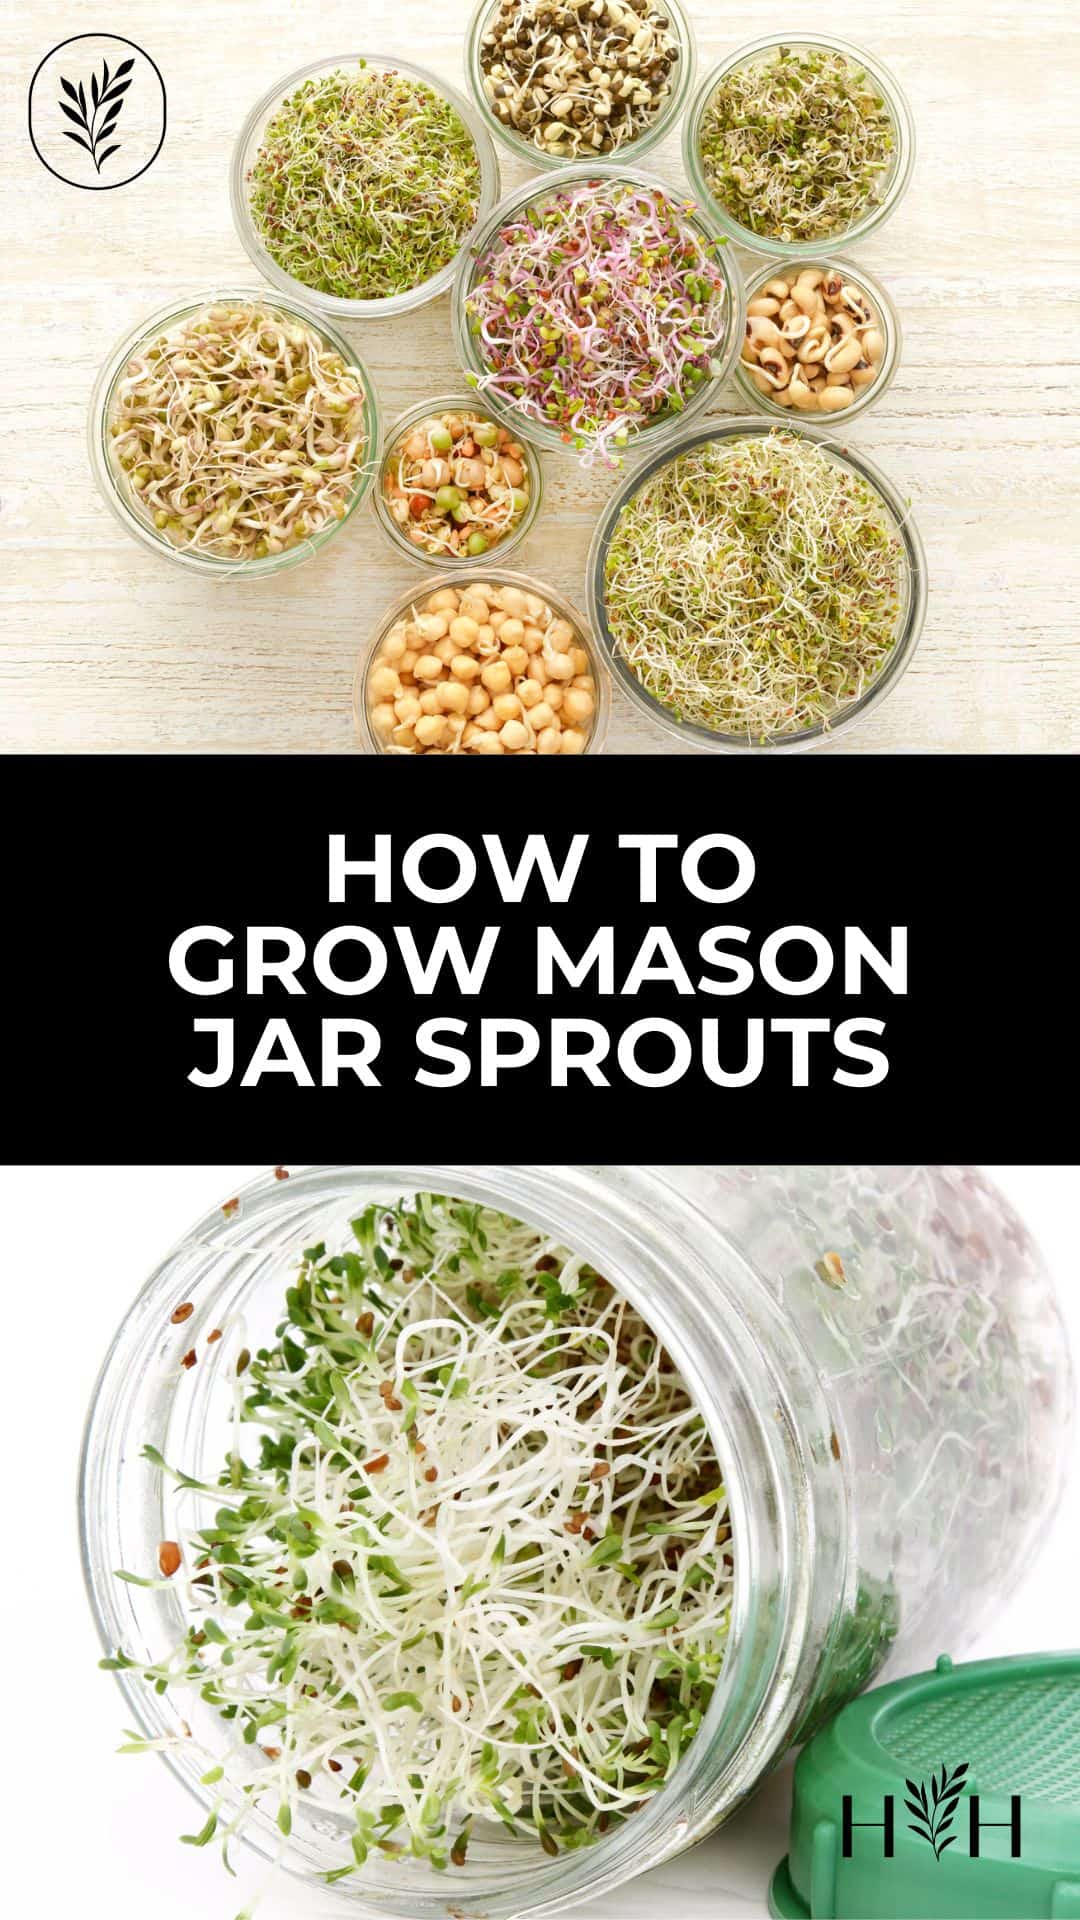 Growing sprouts in a mason jar via @home4theharvest